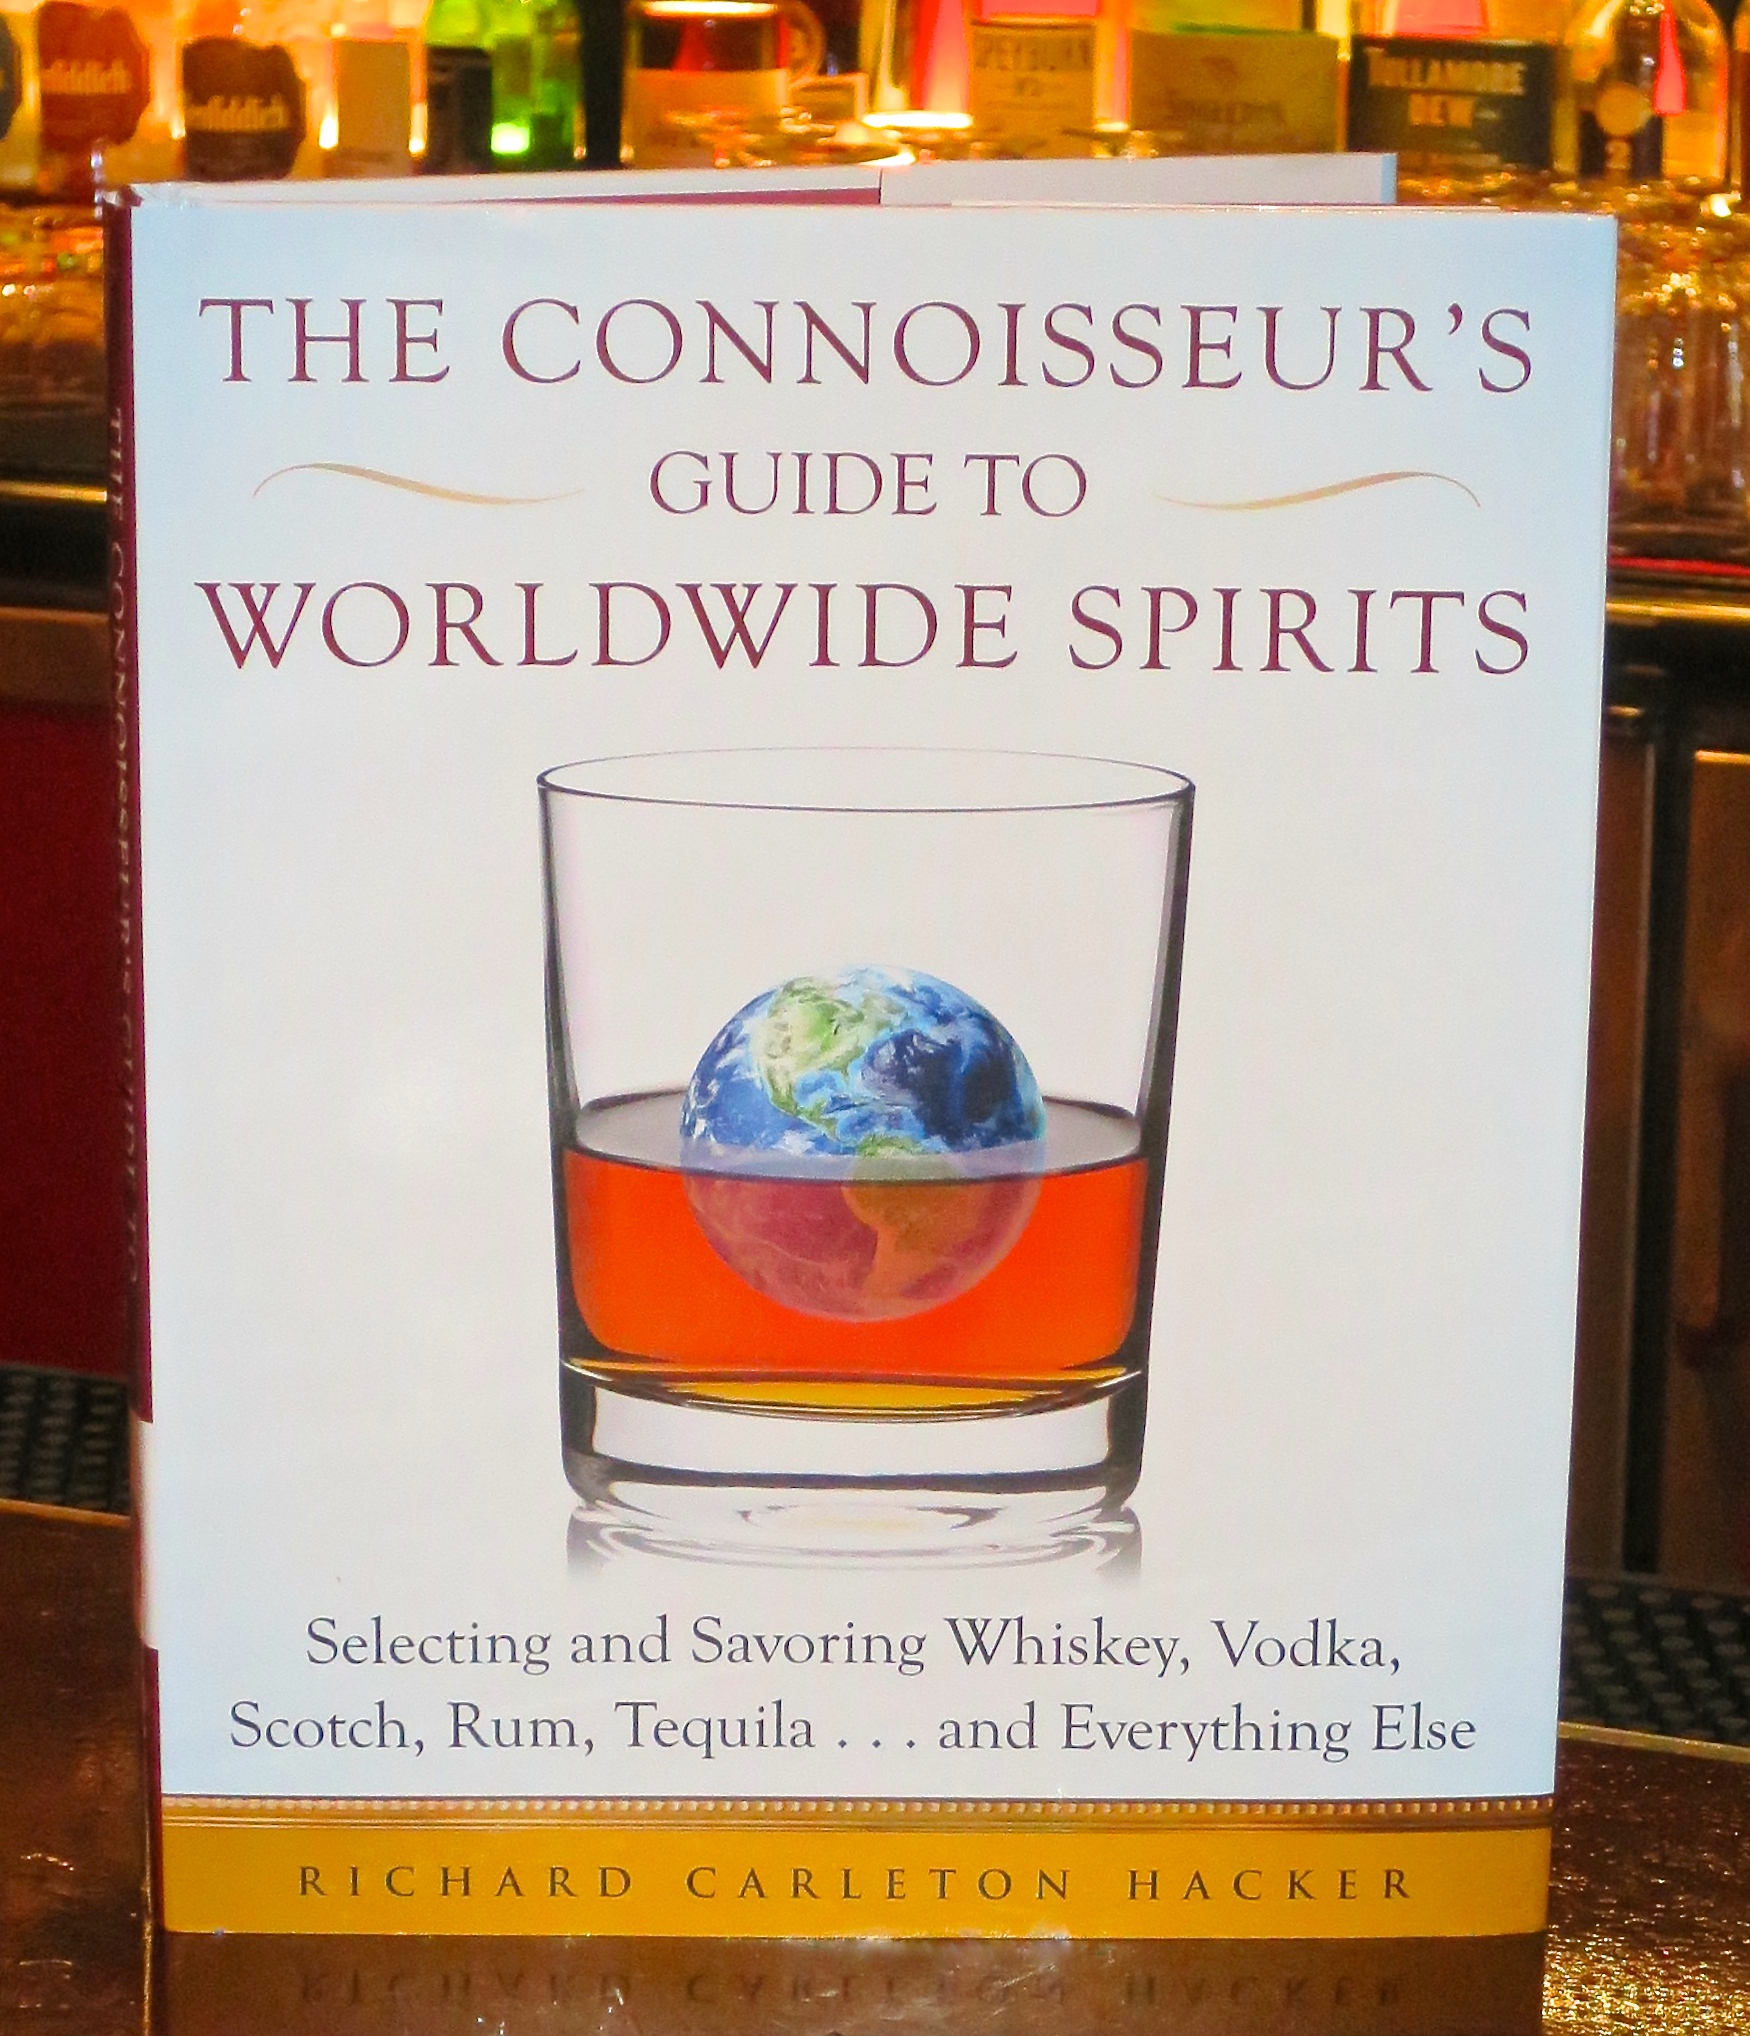 The Connoisseur's Guide to Worldwide Spirits